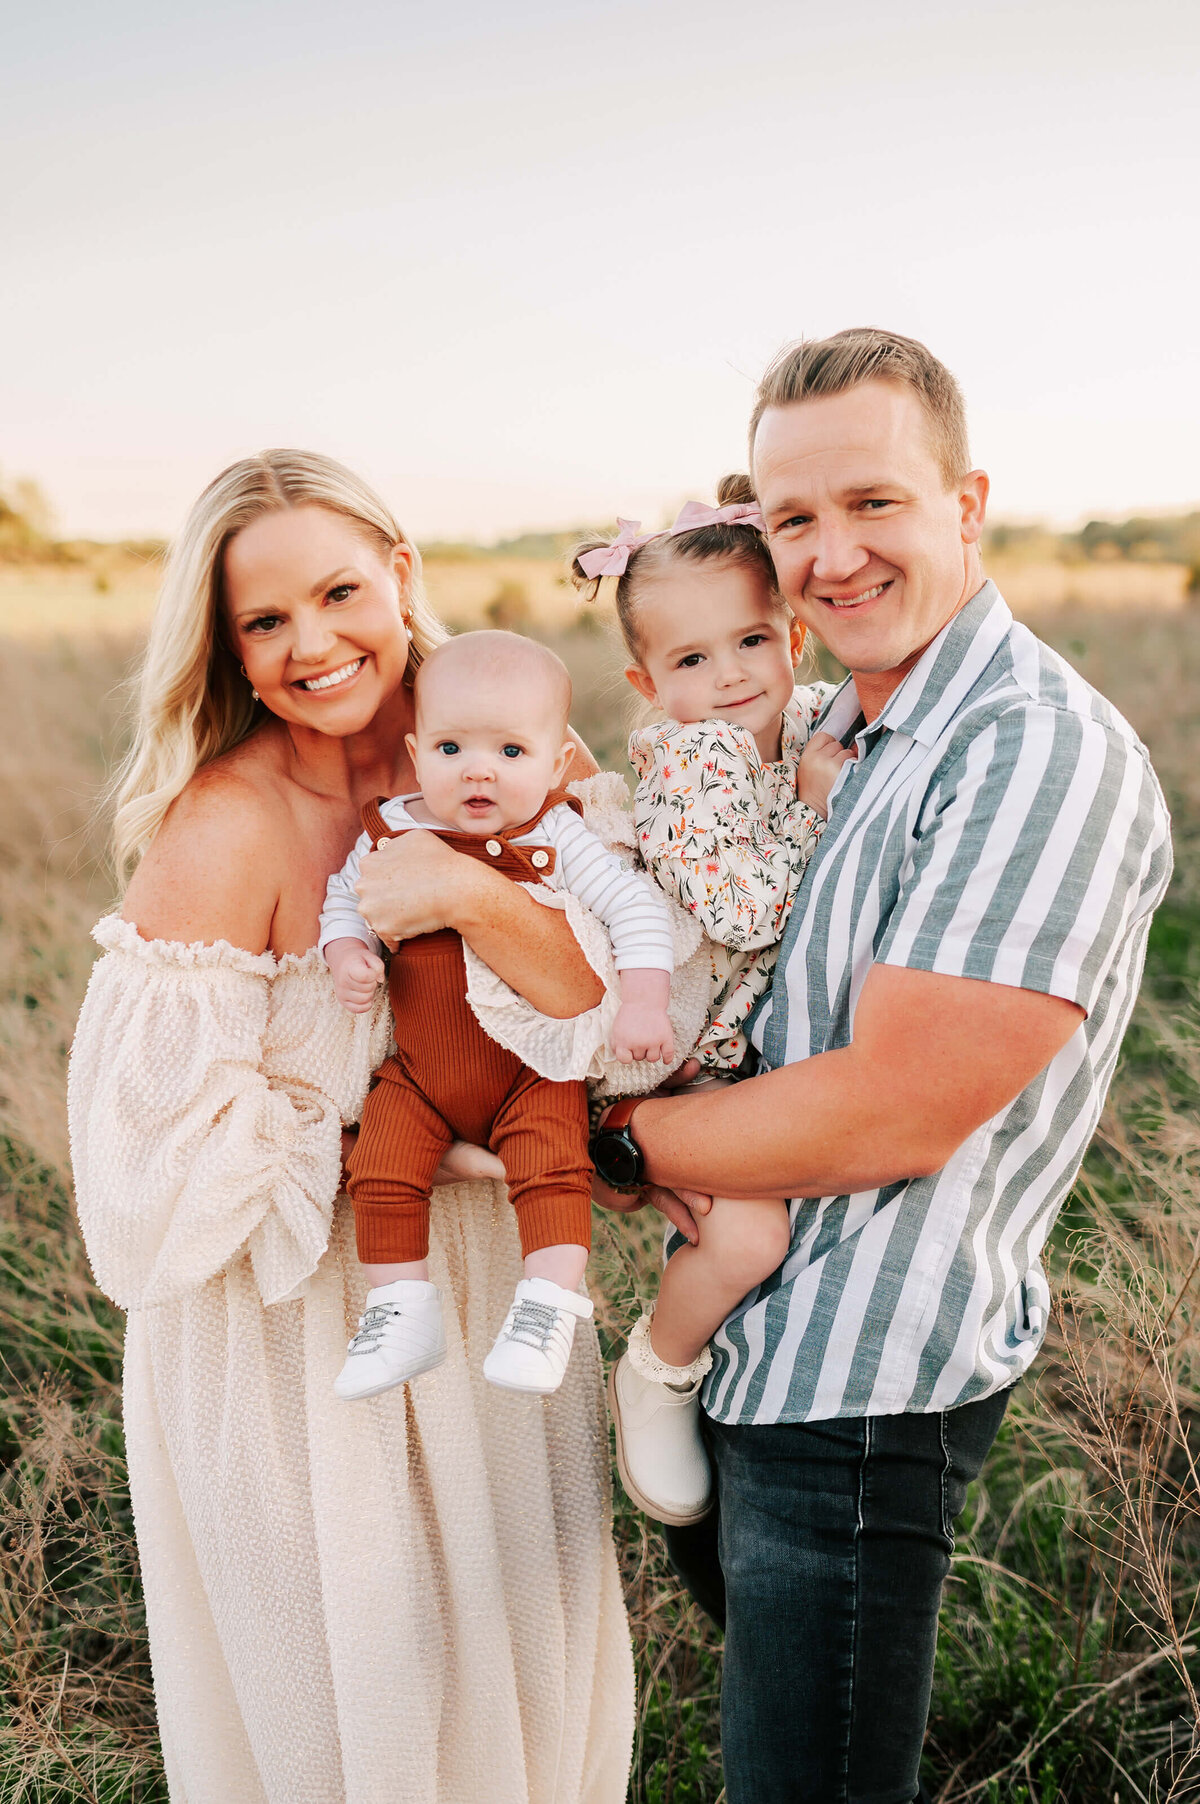 Springfield MO family photographer Jessica Kennedy of The XO Photography captures family smiling cheek to cheek at sunset